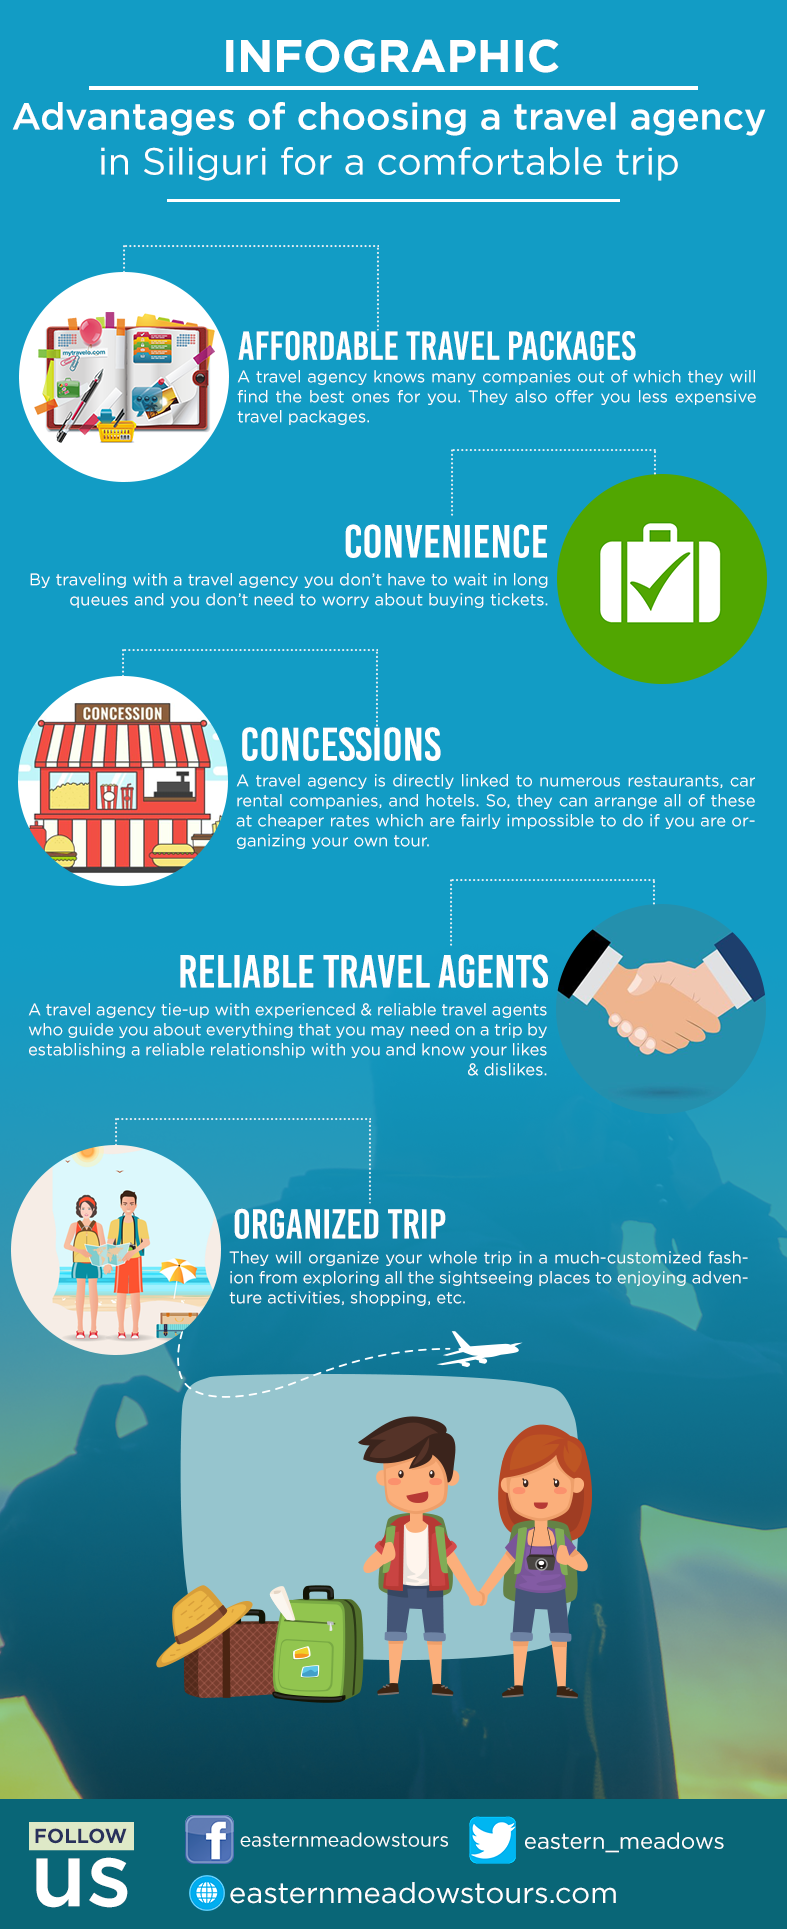 Infographic travel agency in Siliguri